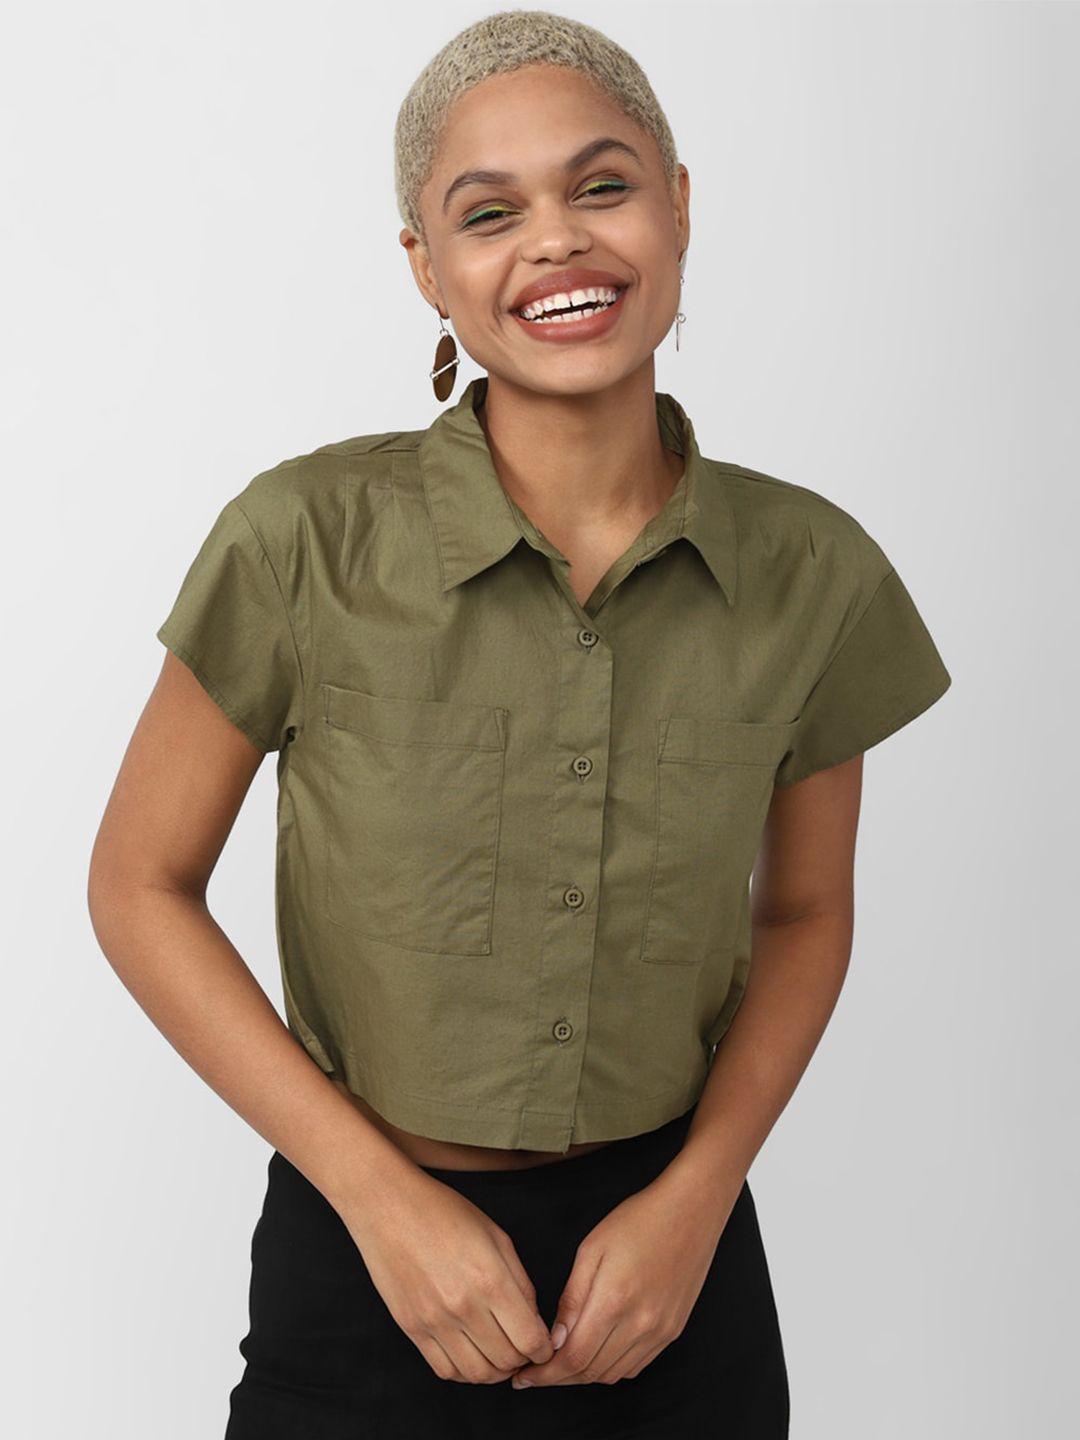 forever 21 olive green shirt style top